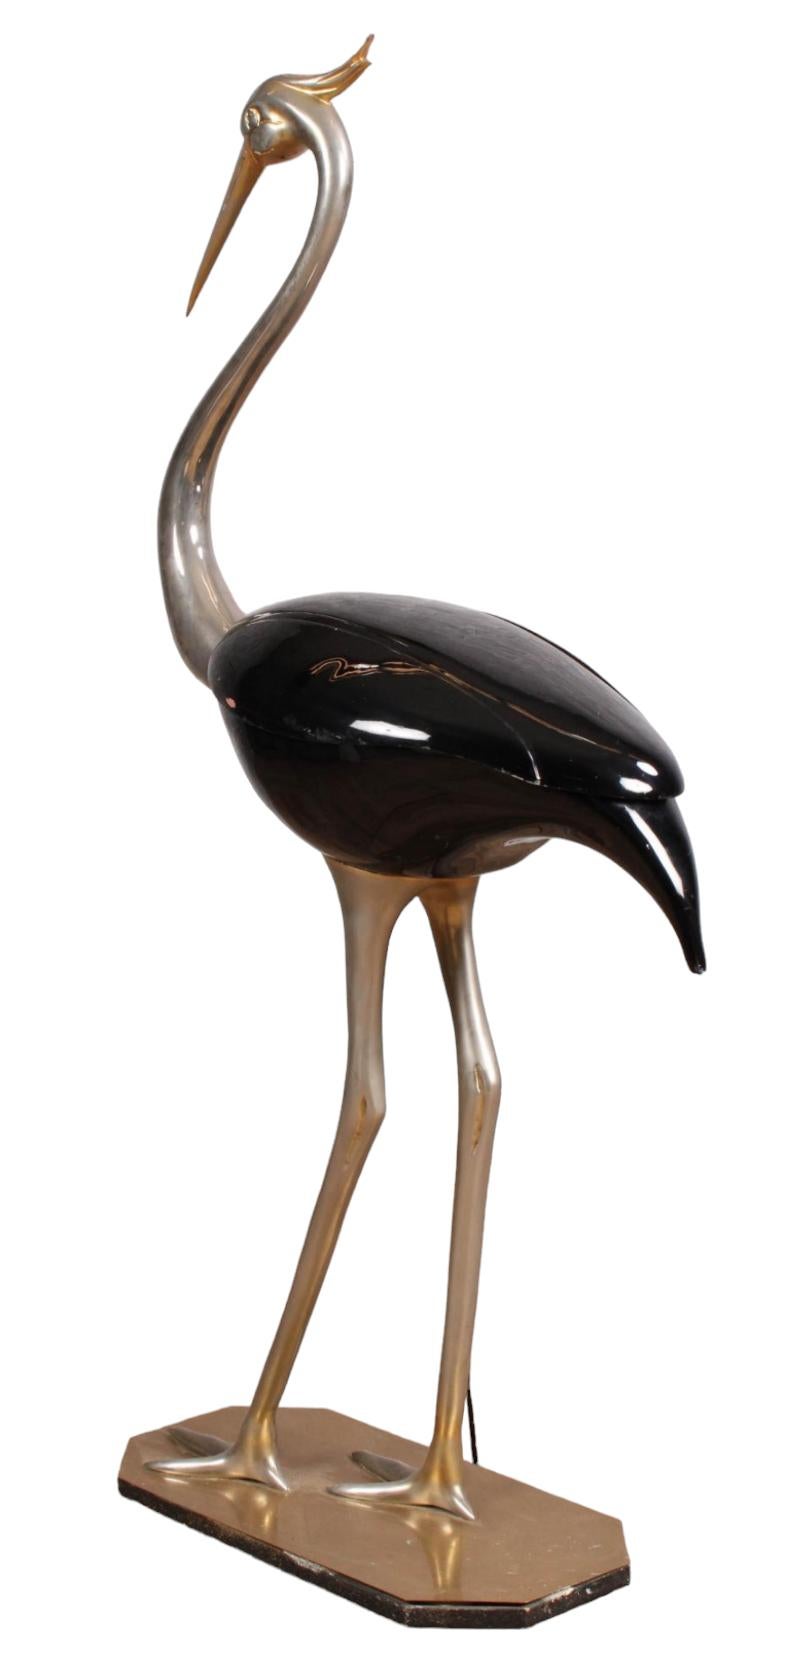 Rare Fondica metal and enamel crane sculpture made in France during the 1970s. The storage compartment in the body of the crane adds to the interest of this piece. For the majestic crane lover or the quirky decor enthusiast. Bears the signature of